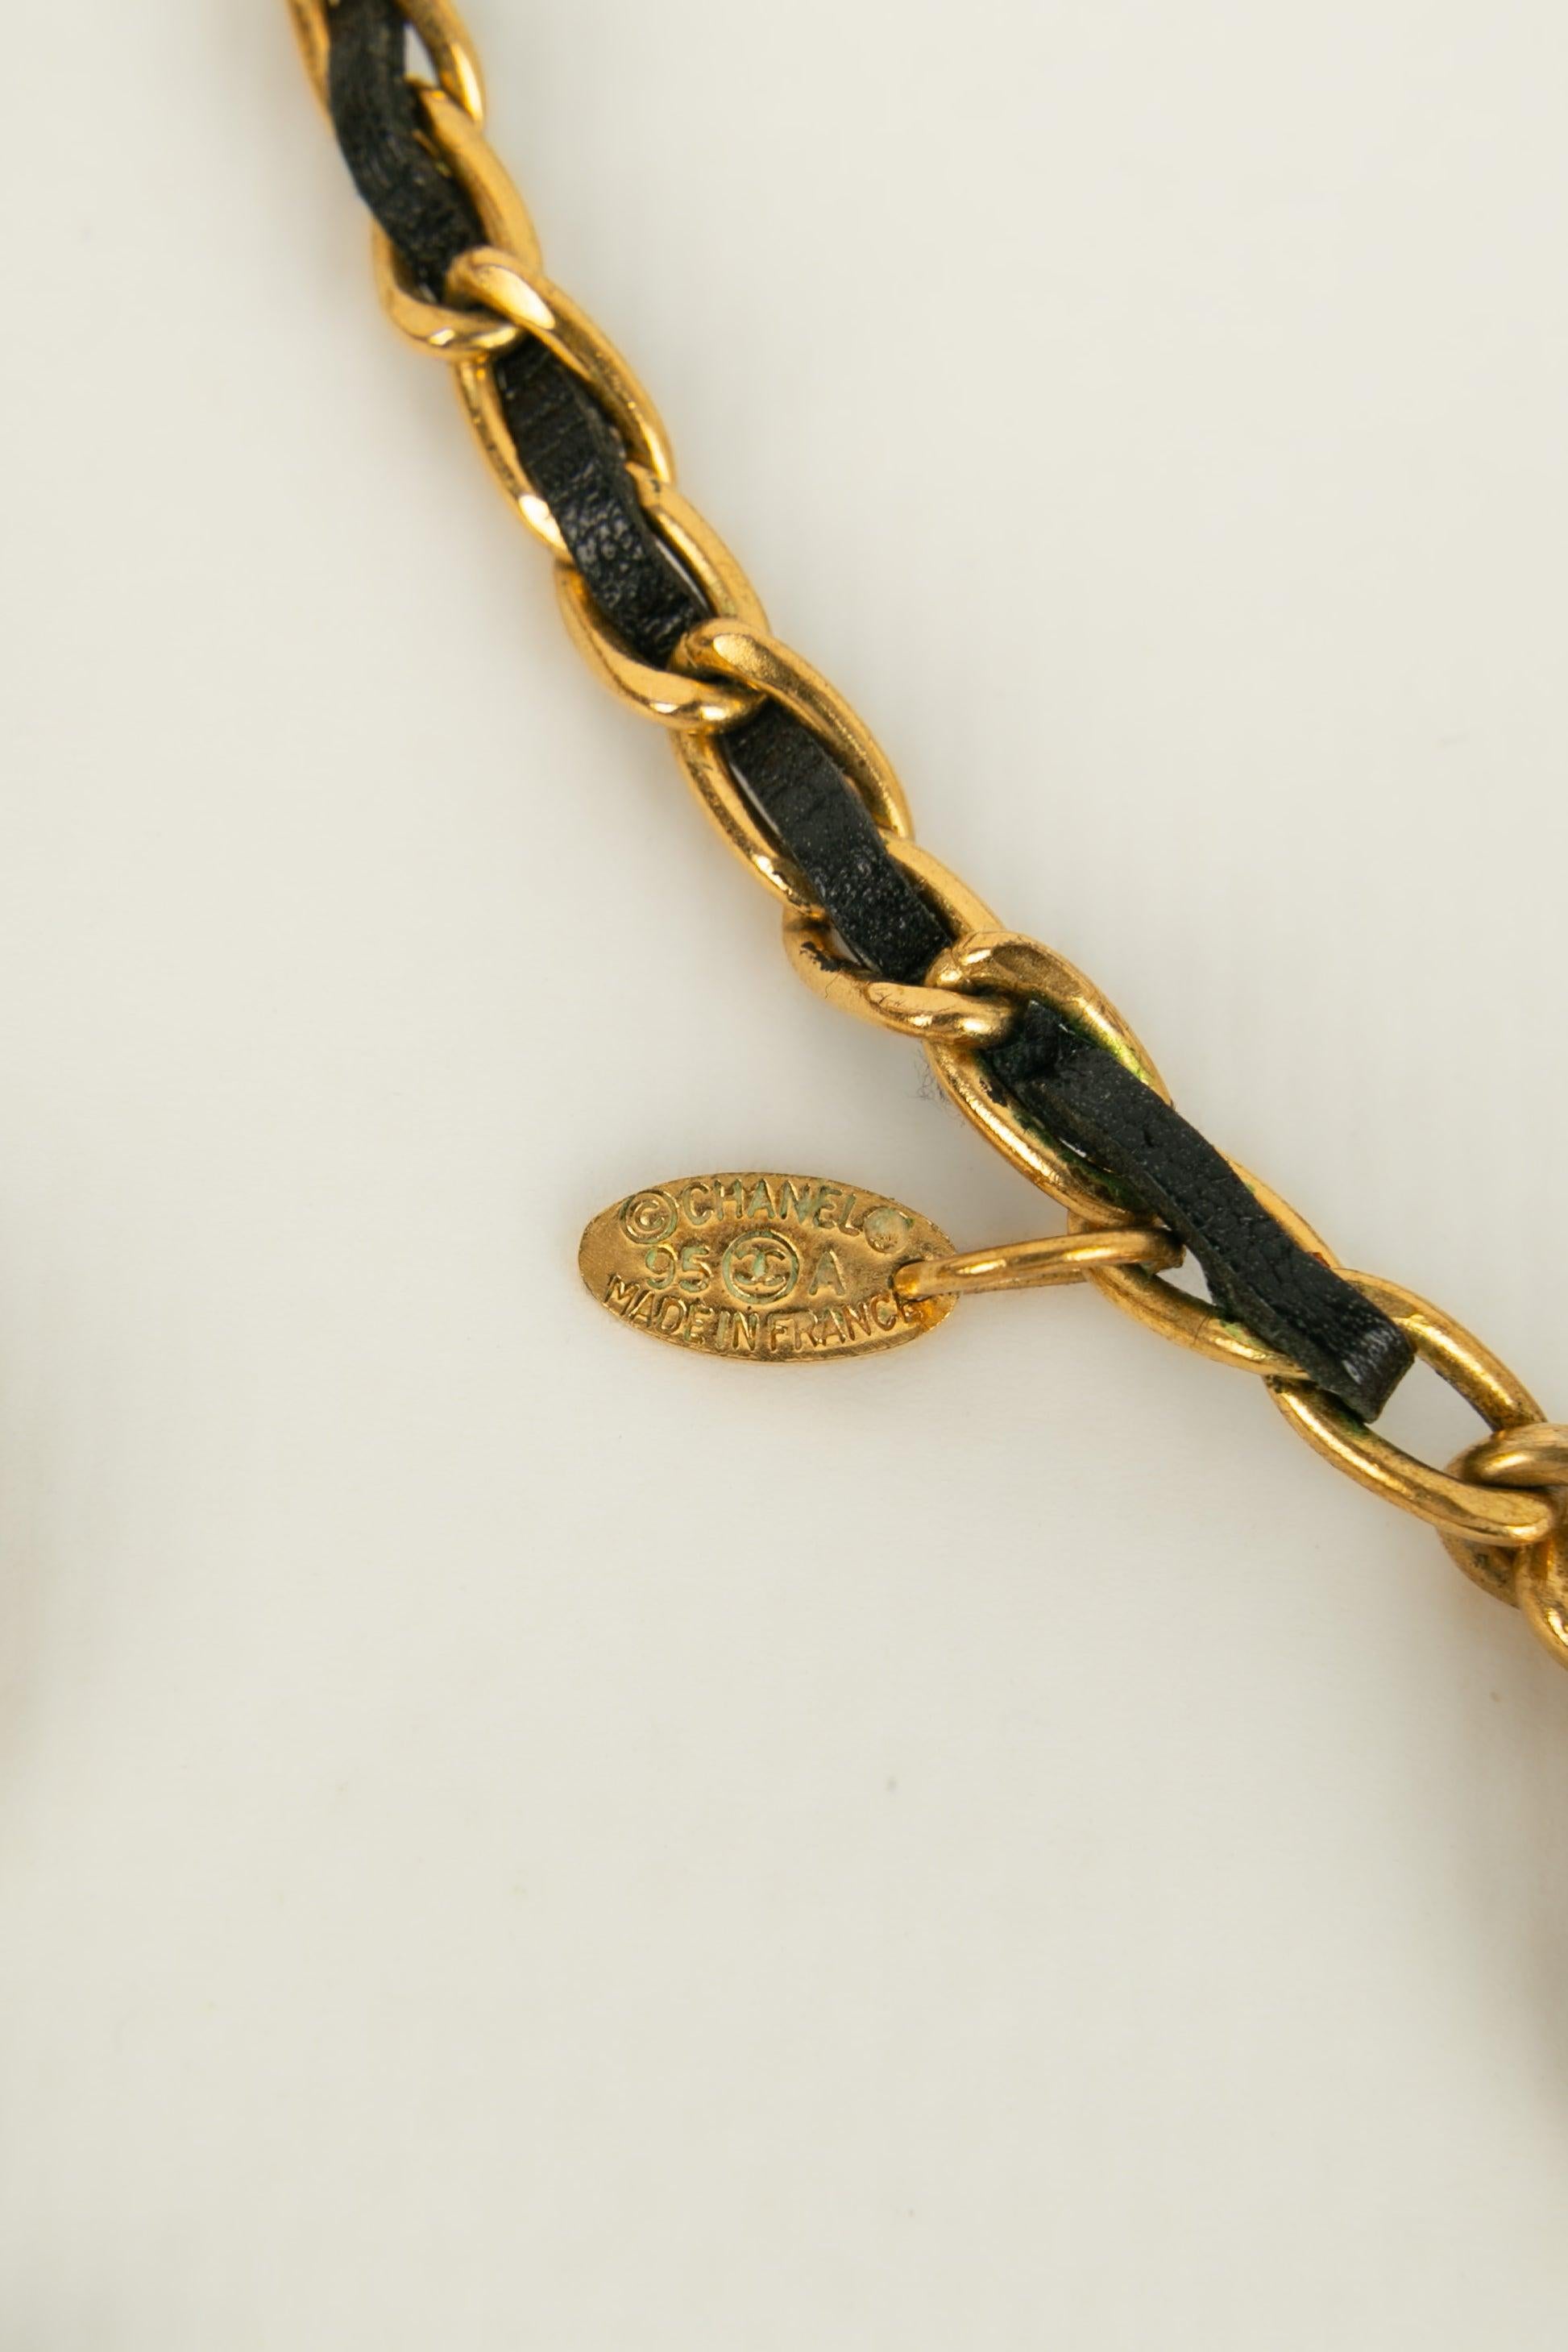 Chanel Necklace / Sautoir in Gold-Plated Metal, 1995 For Sale 4